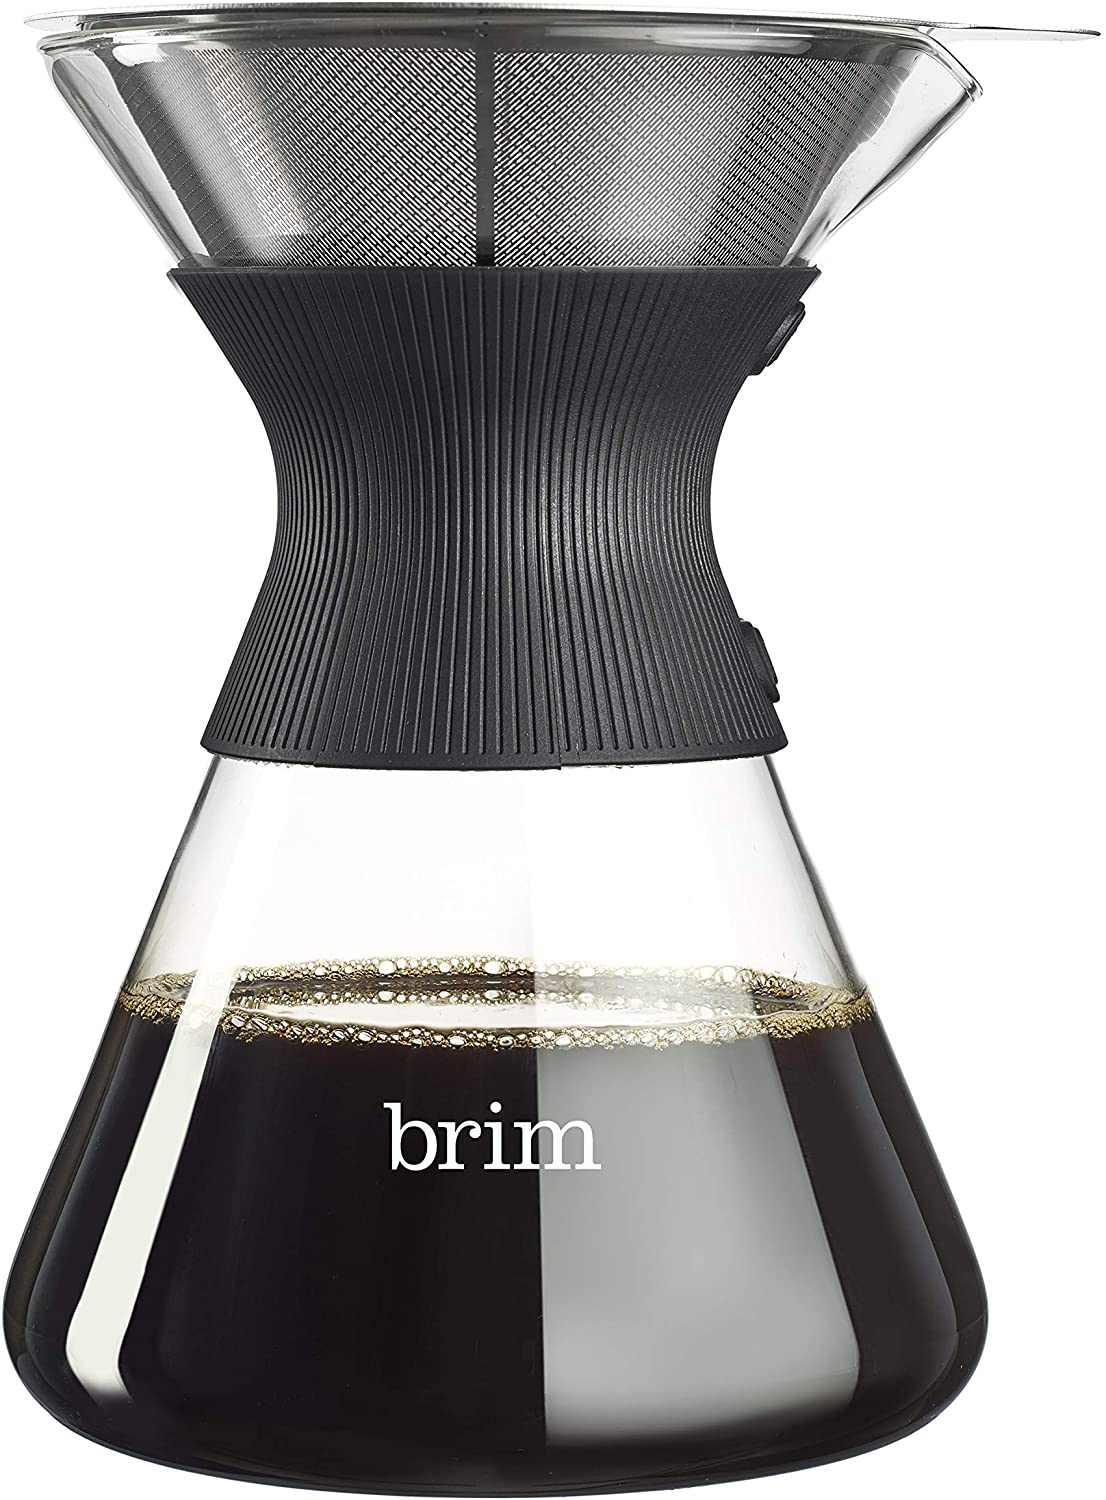 6-Cup Brim Pour Over Coffee Maker Kit $17.06 + Free Shipping w/ Prime